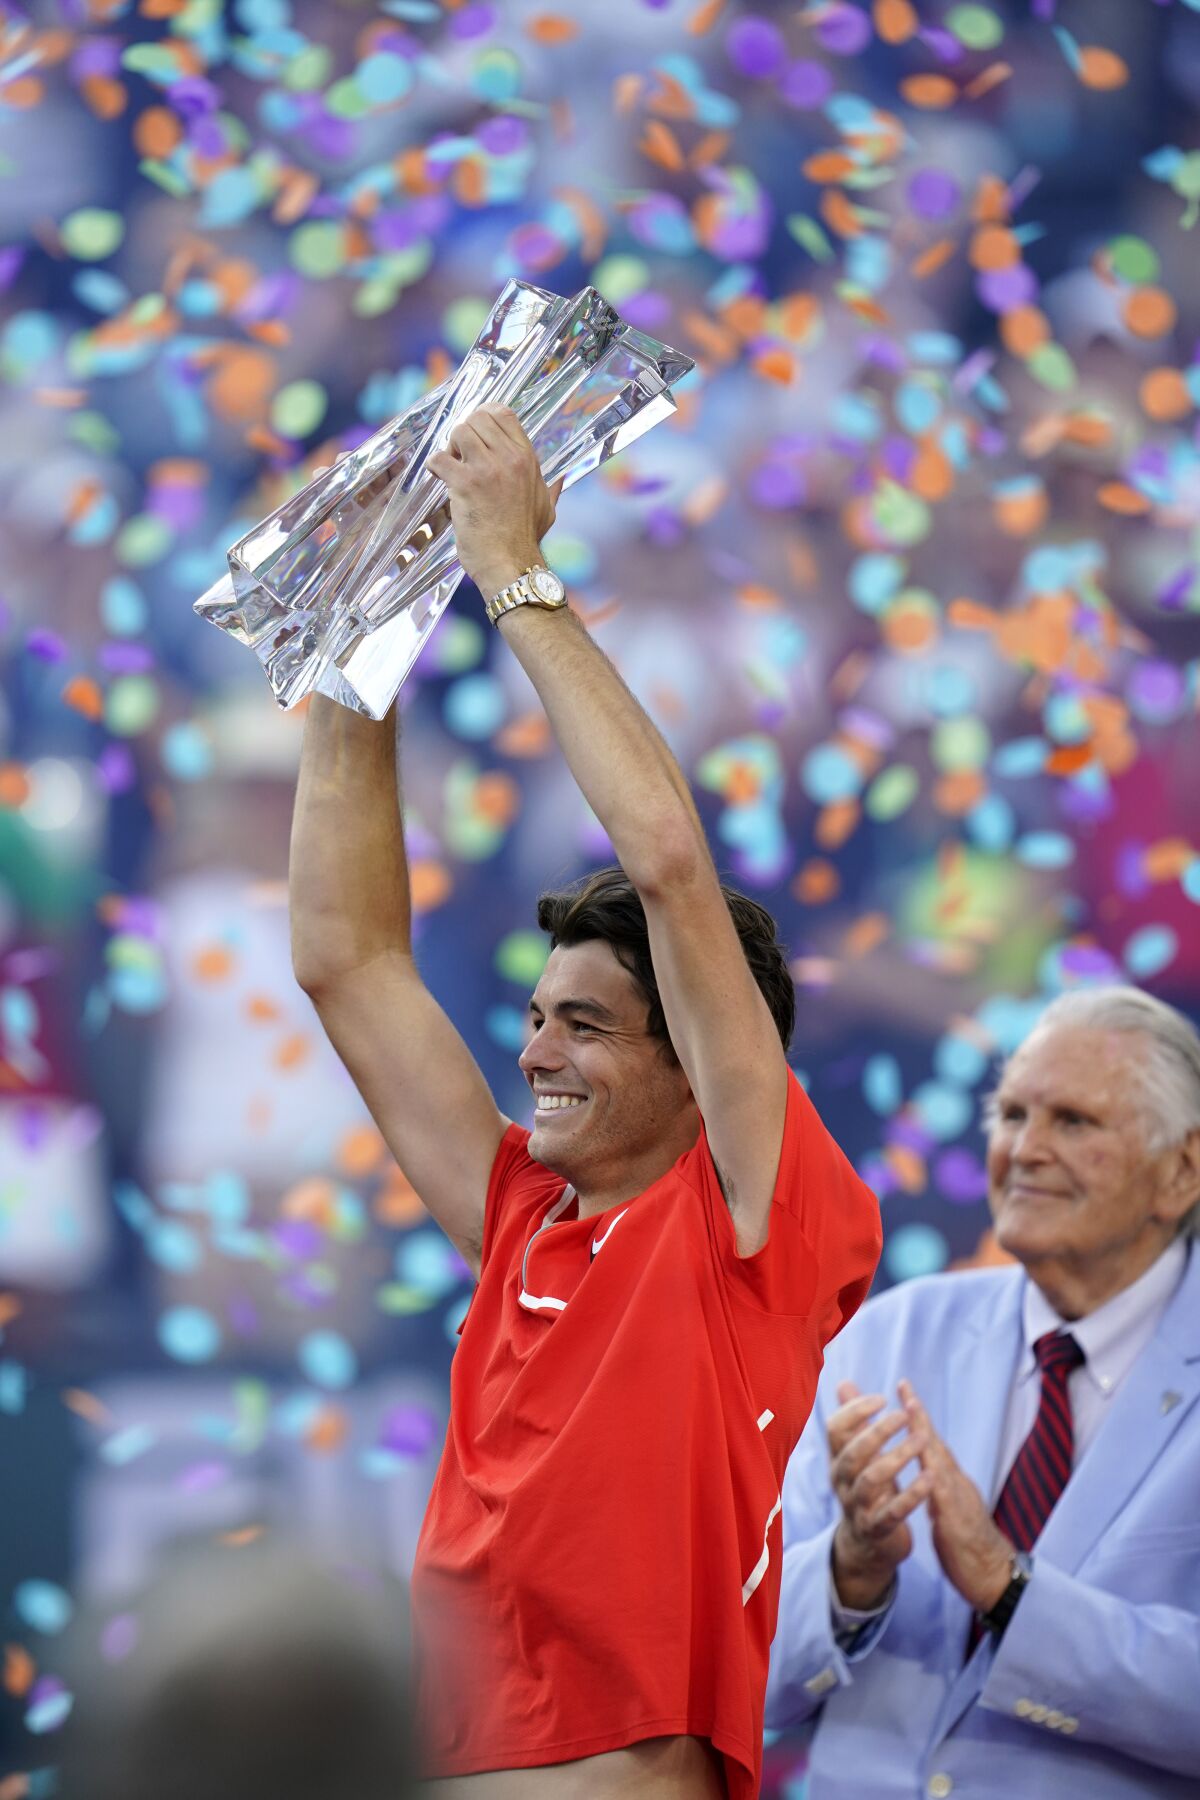 Taylor Fritz holds up his trophy after winning the men's singles finals at the BNP Paribas Open tennis tournament in 2022.